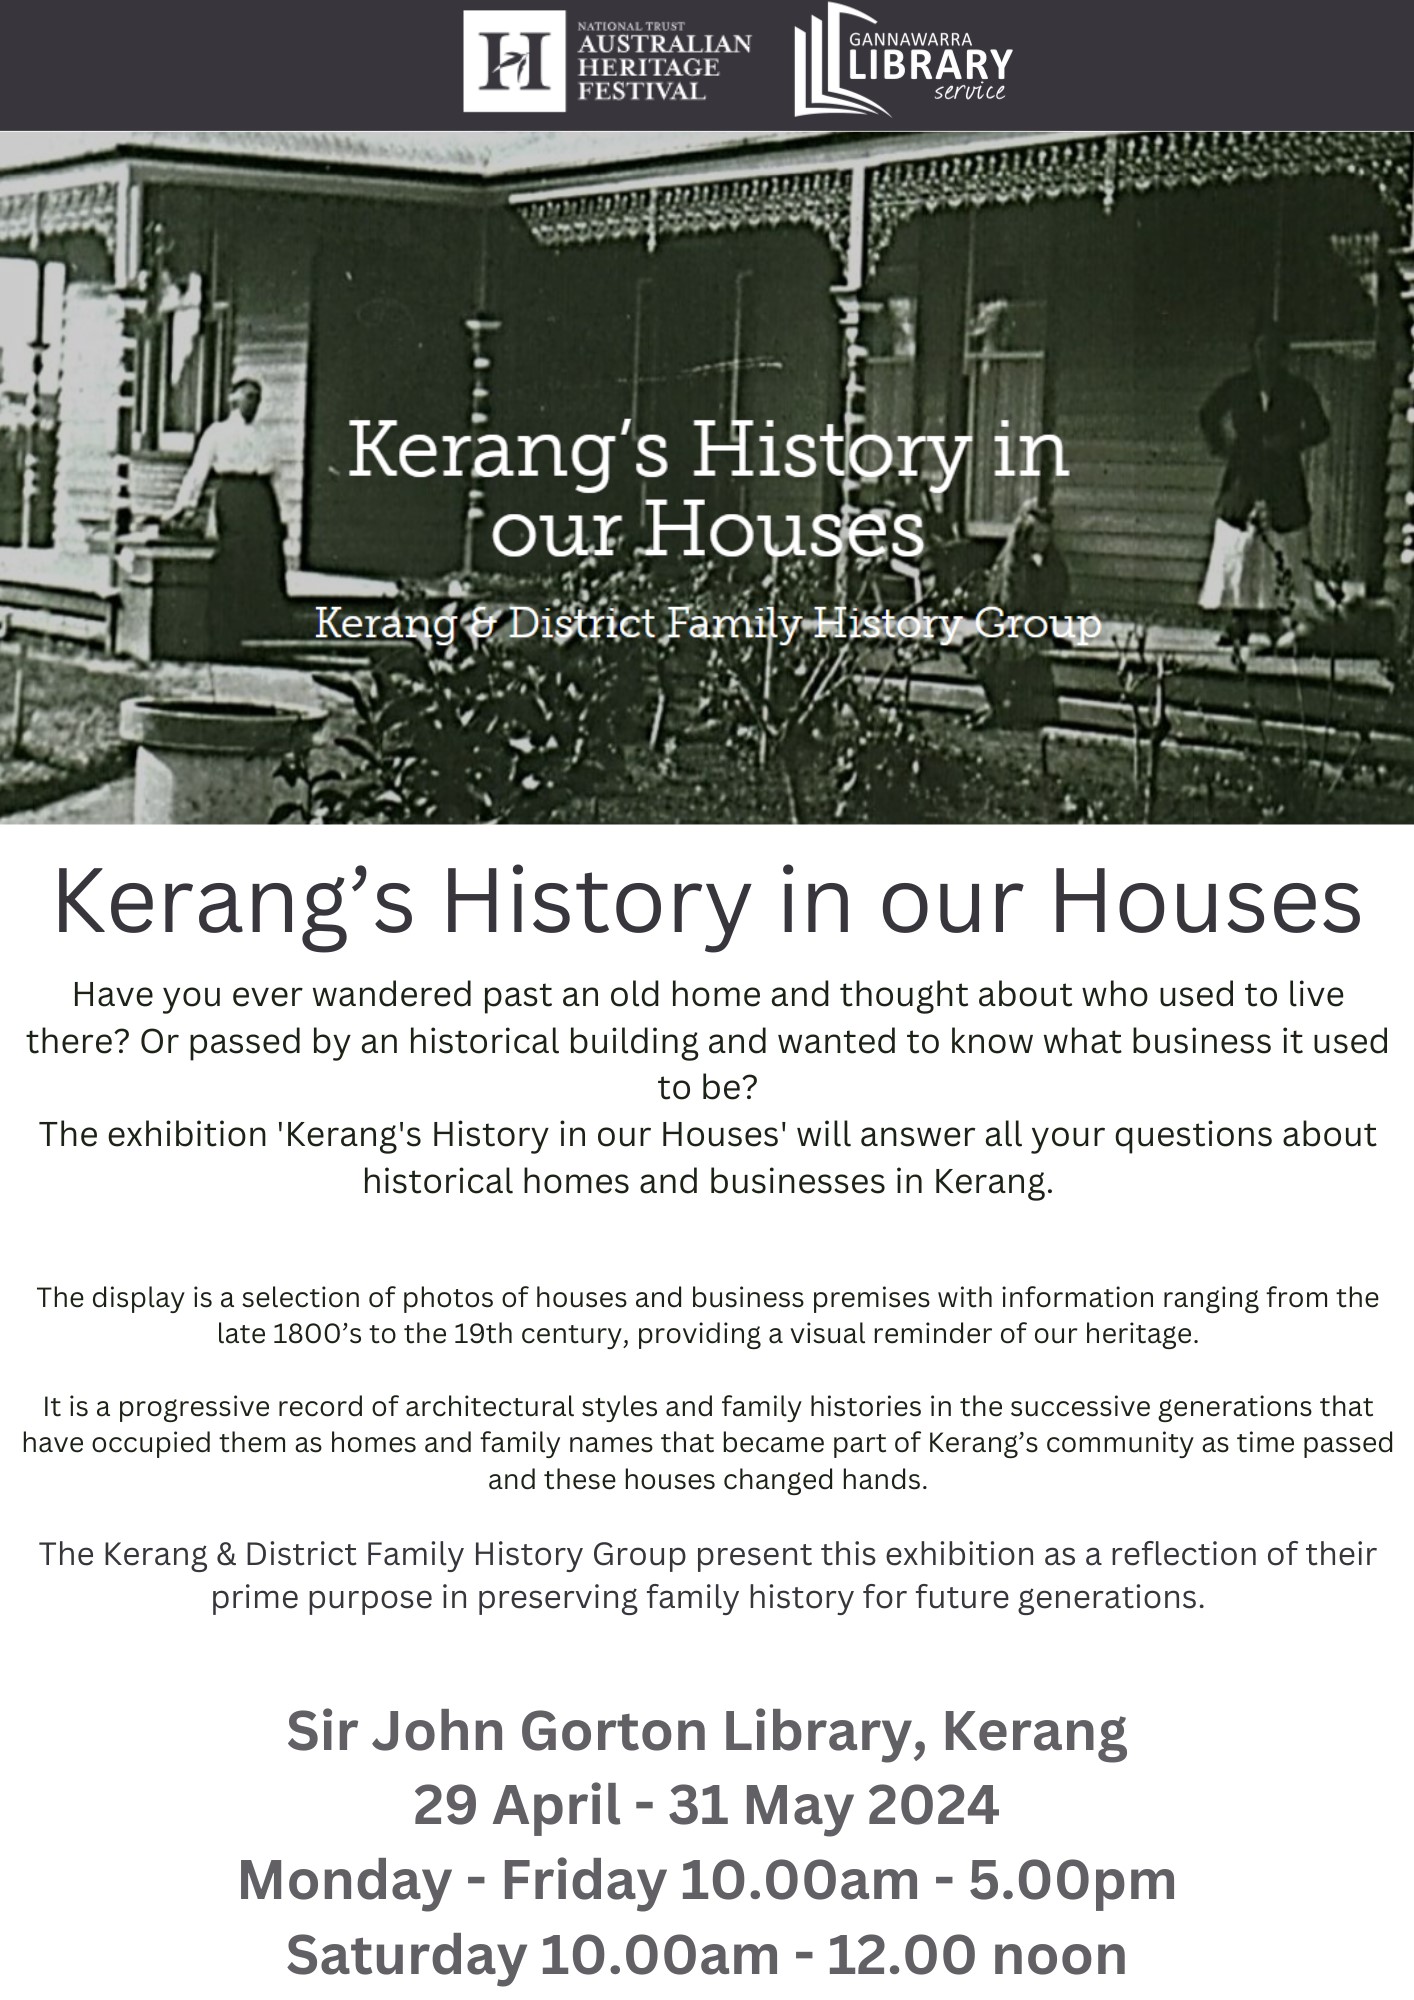 Kerang’s-History-in-our-Houses-5.jpeg